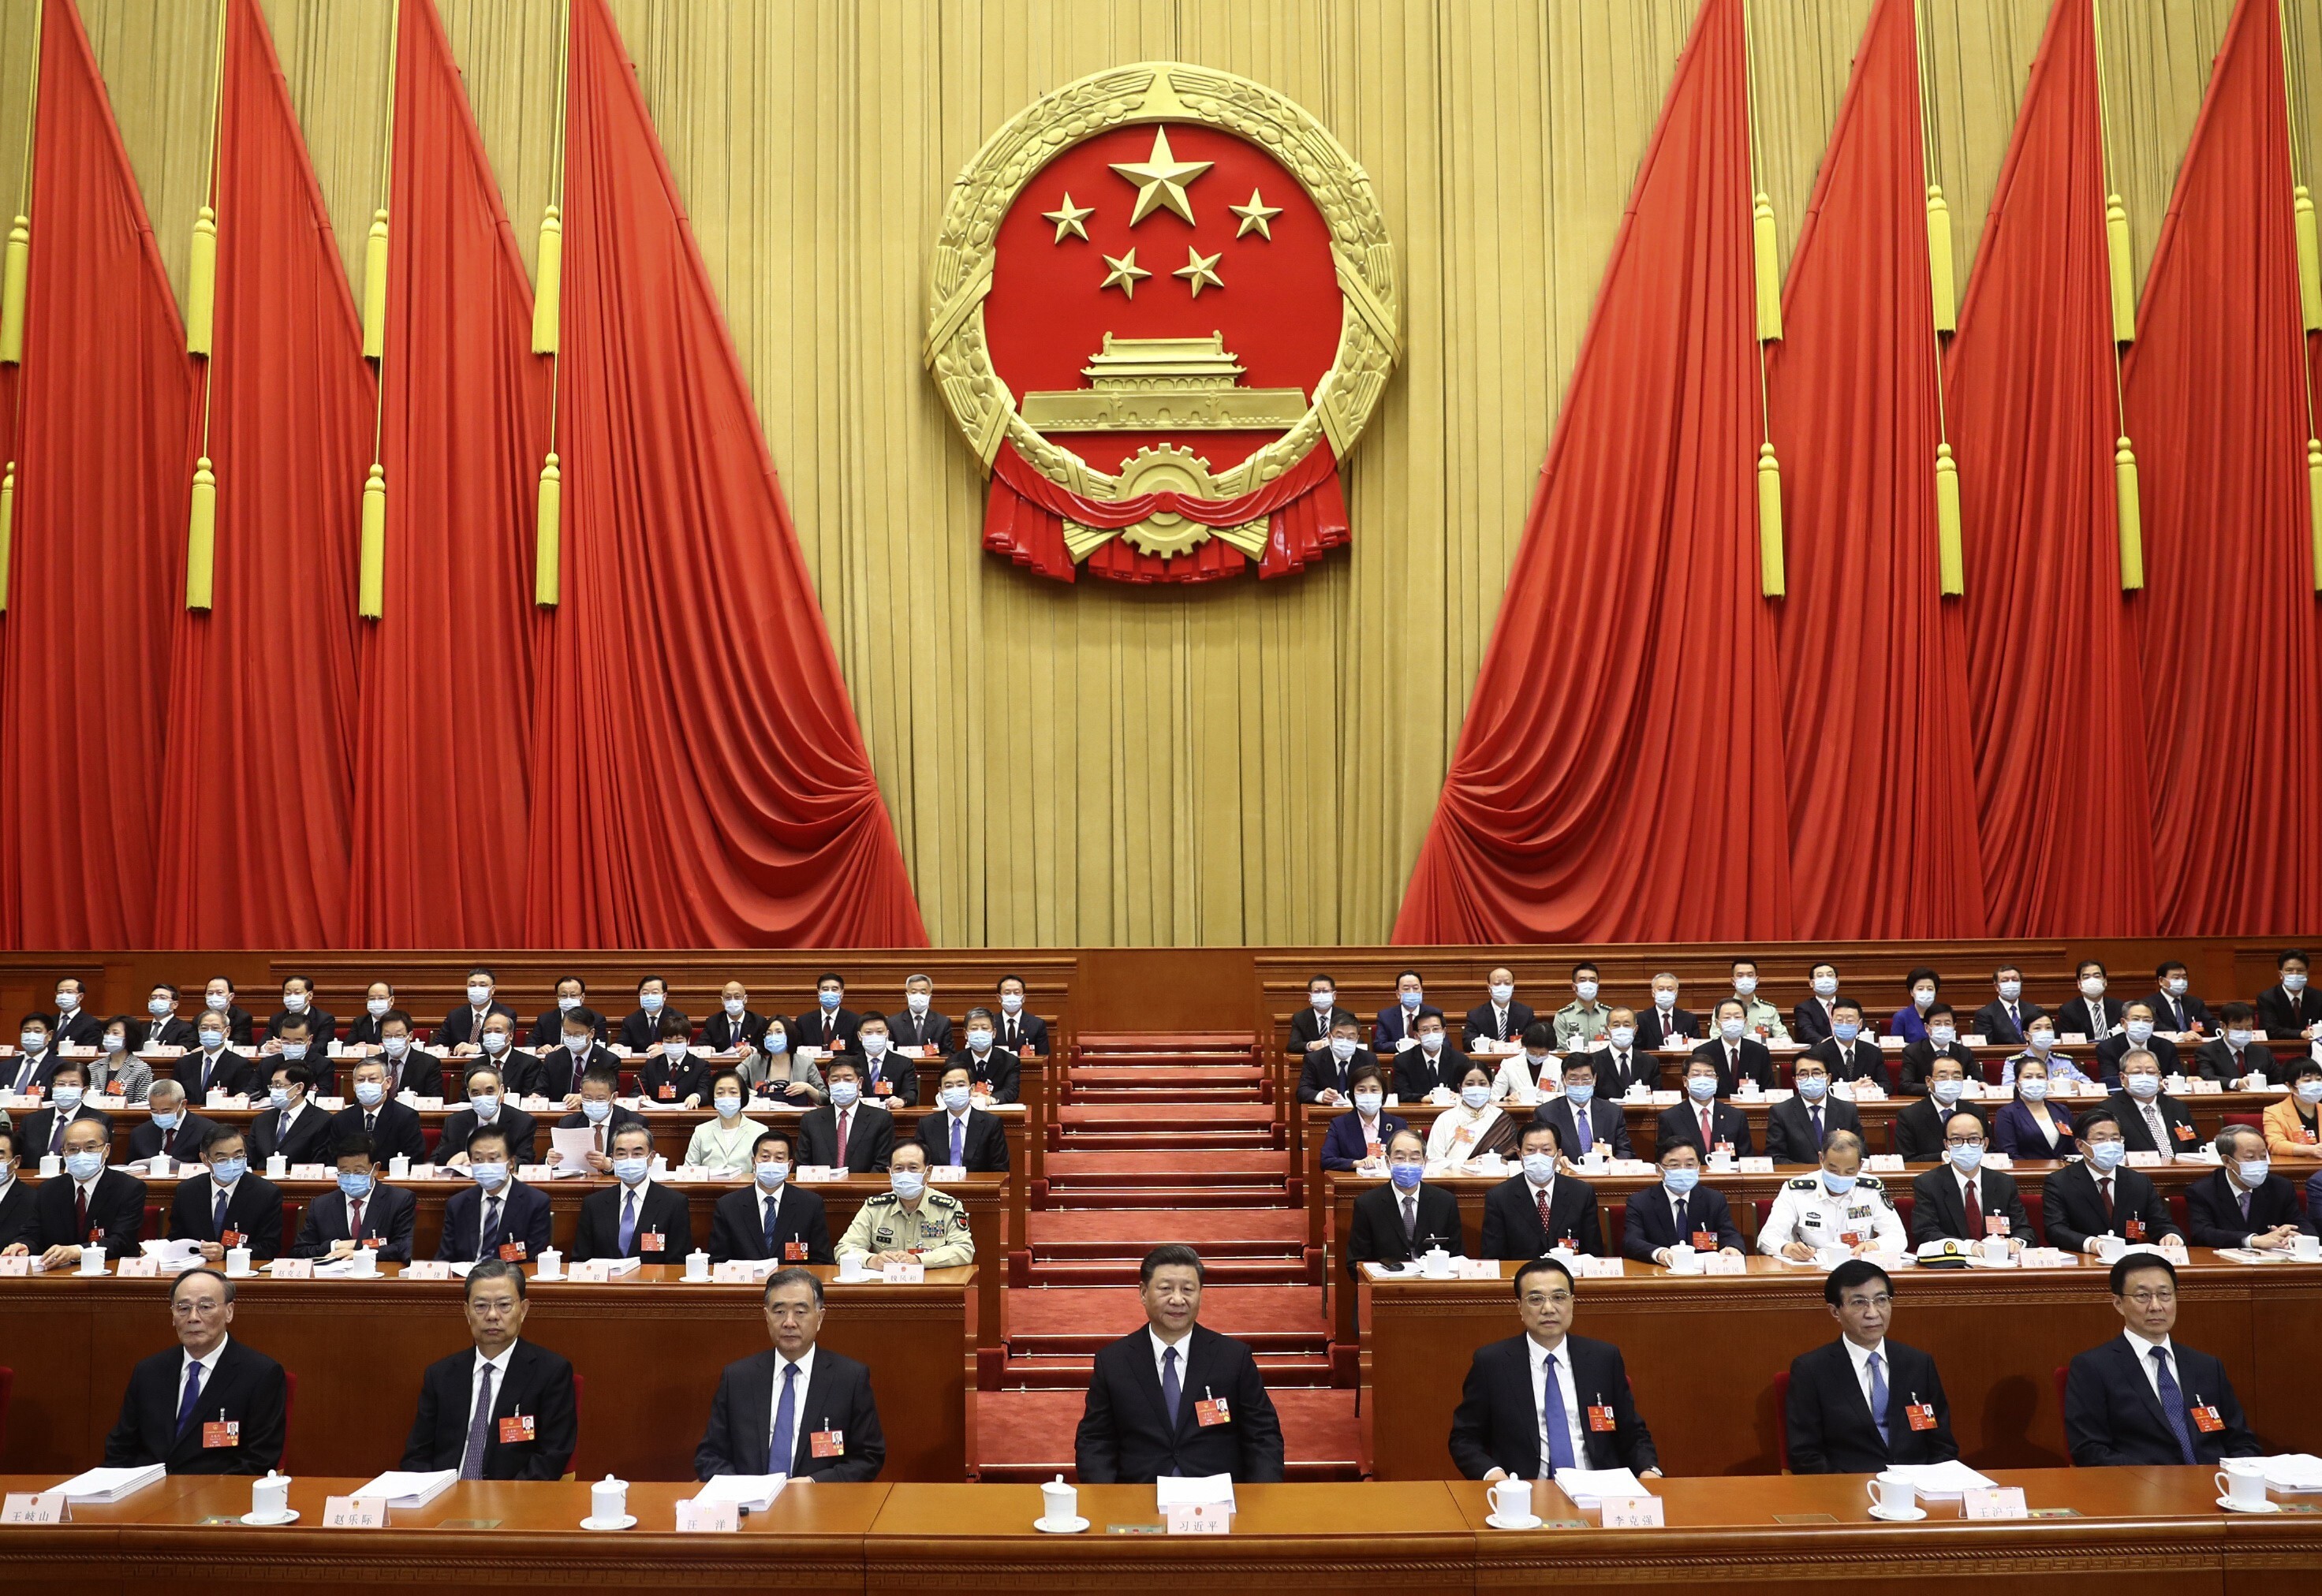 Chinese President Xi Jinping and other officials attend the opening session of the National People's Congress at the Great Hall of the People. Xi has crushed factional struggles in the CCP, but in so doing has created his own personal faction. Photo: Xinhua via AP